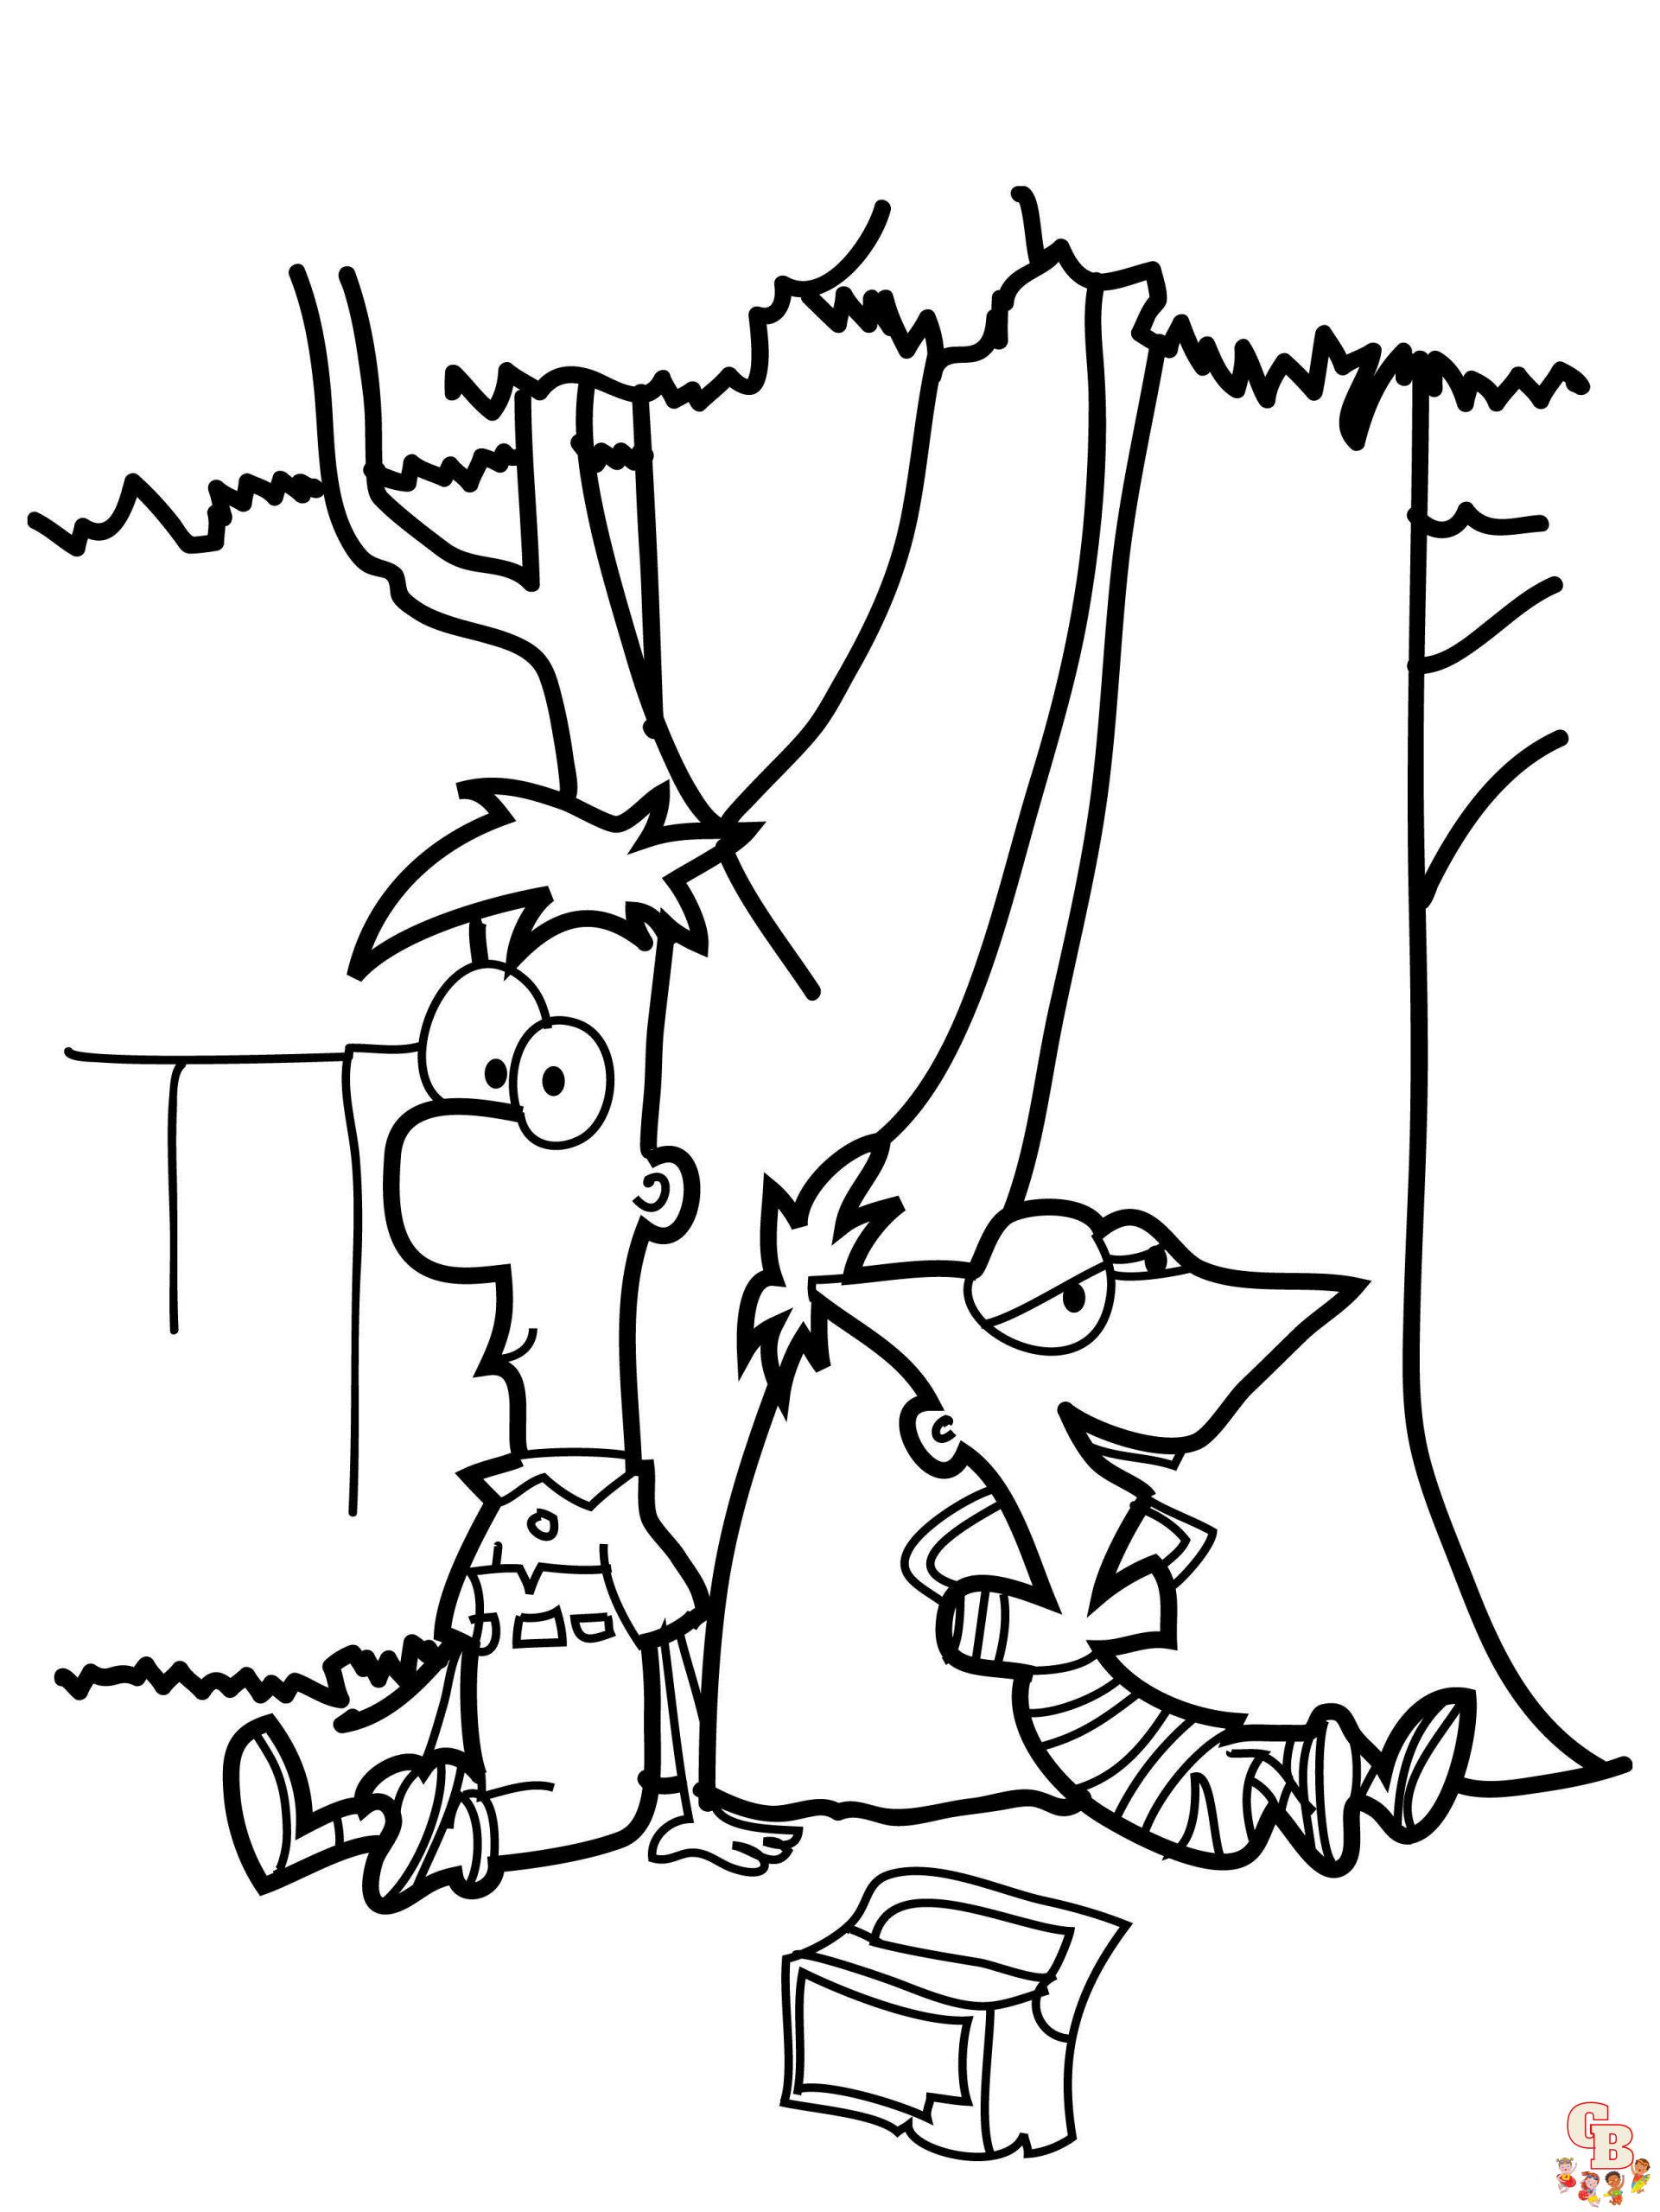 Phineas and Ferb Coloring Pages 1